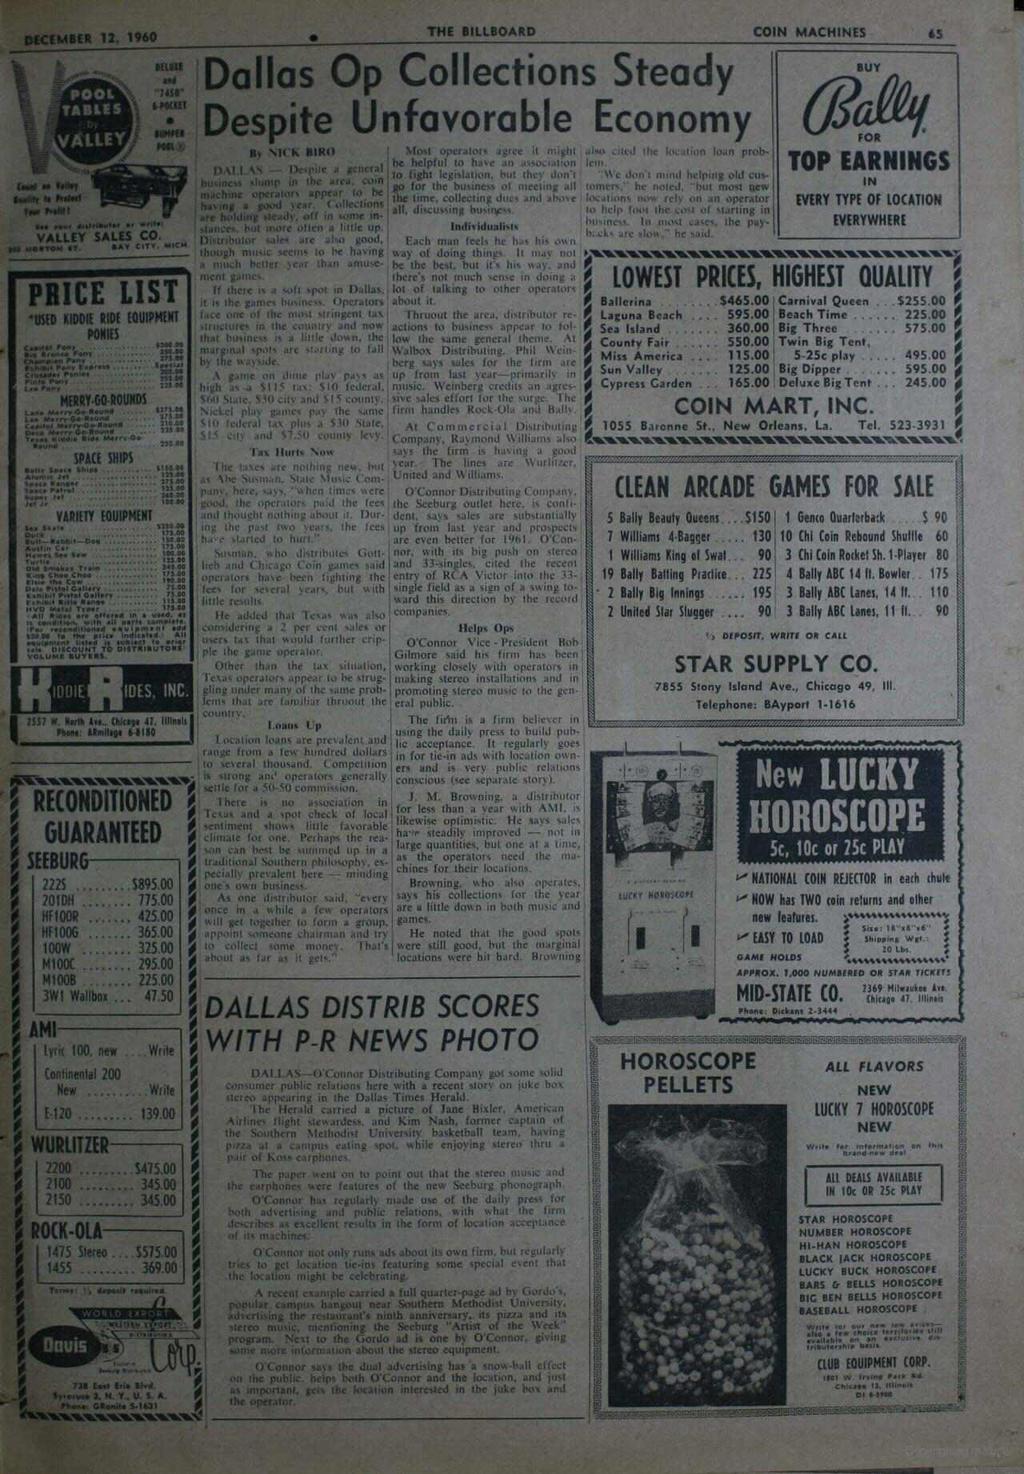 Perhaps www.americanradiohistory.com '. DECEMBER 12, 1960 THE BILLBOARD COIN MACHINES 65 faul ea Volley s_ M hdm Tue anion POOL TABLES VALLEY HUH.a/ MO'! POOH IOW! 100t VALLEY SALES CO. N.